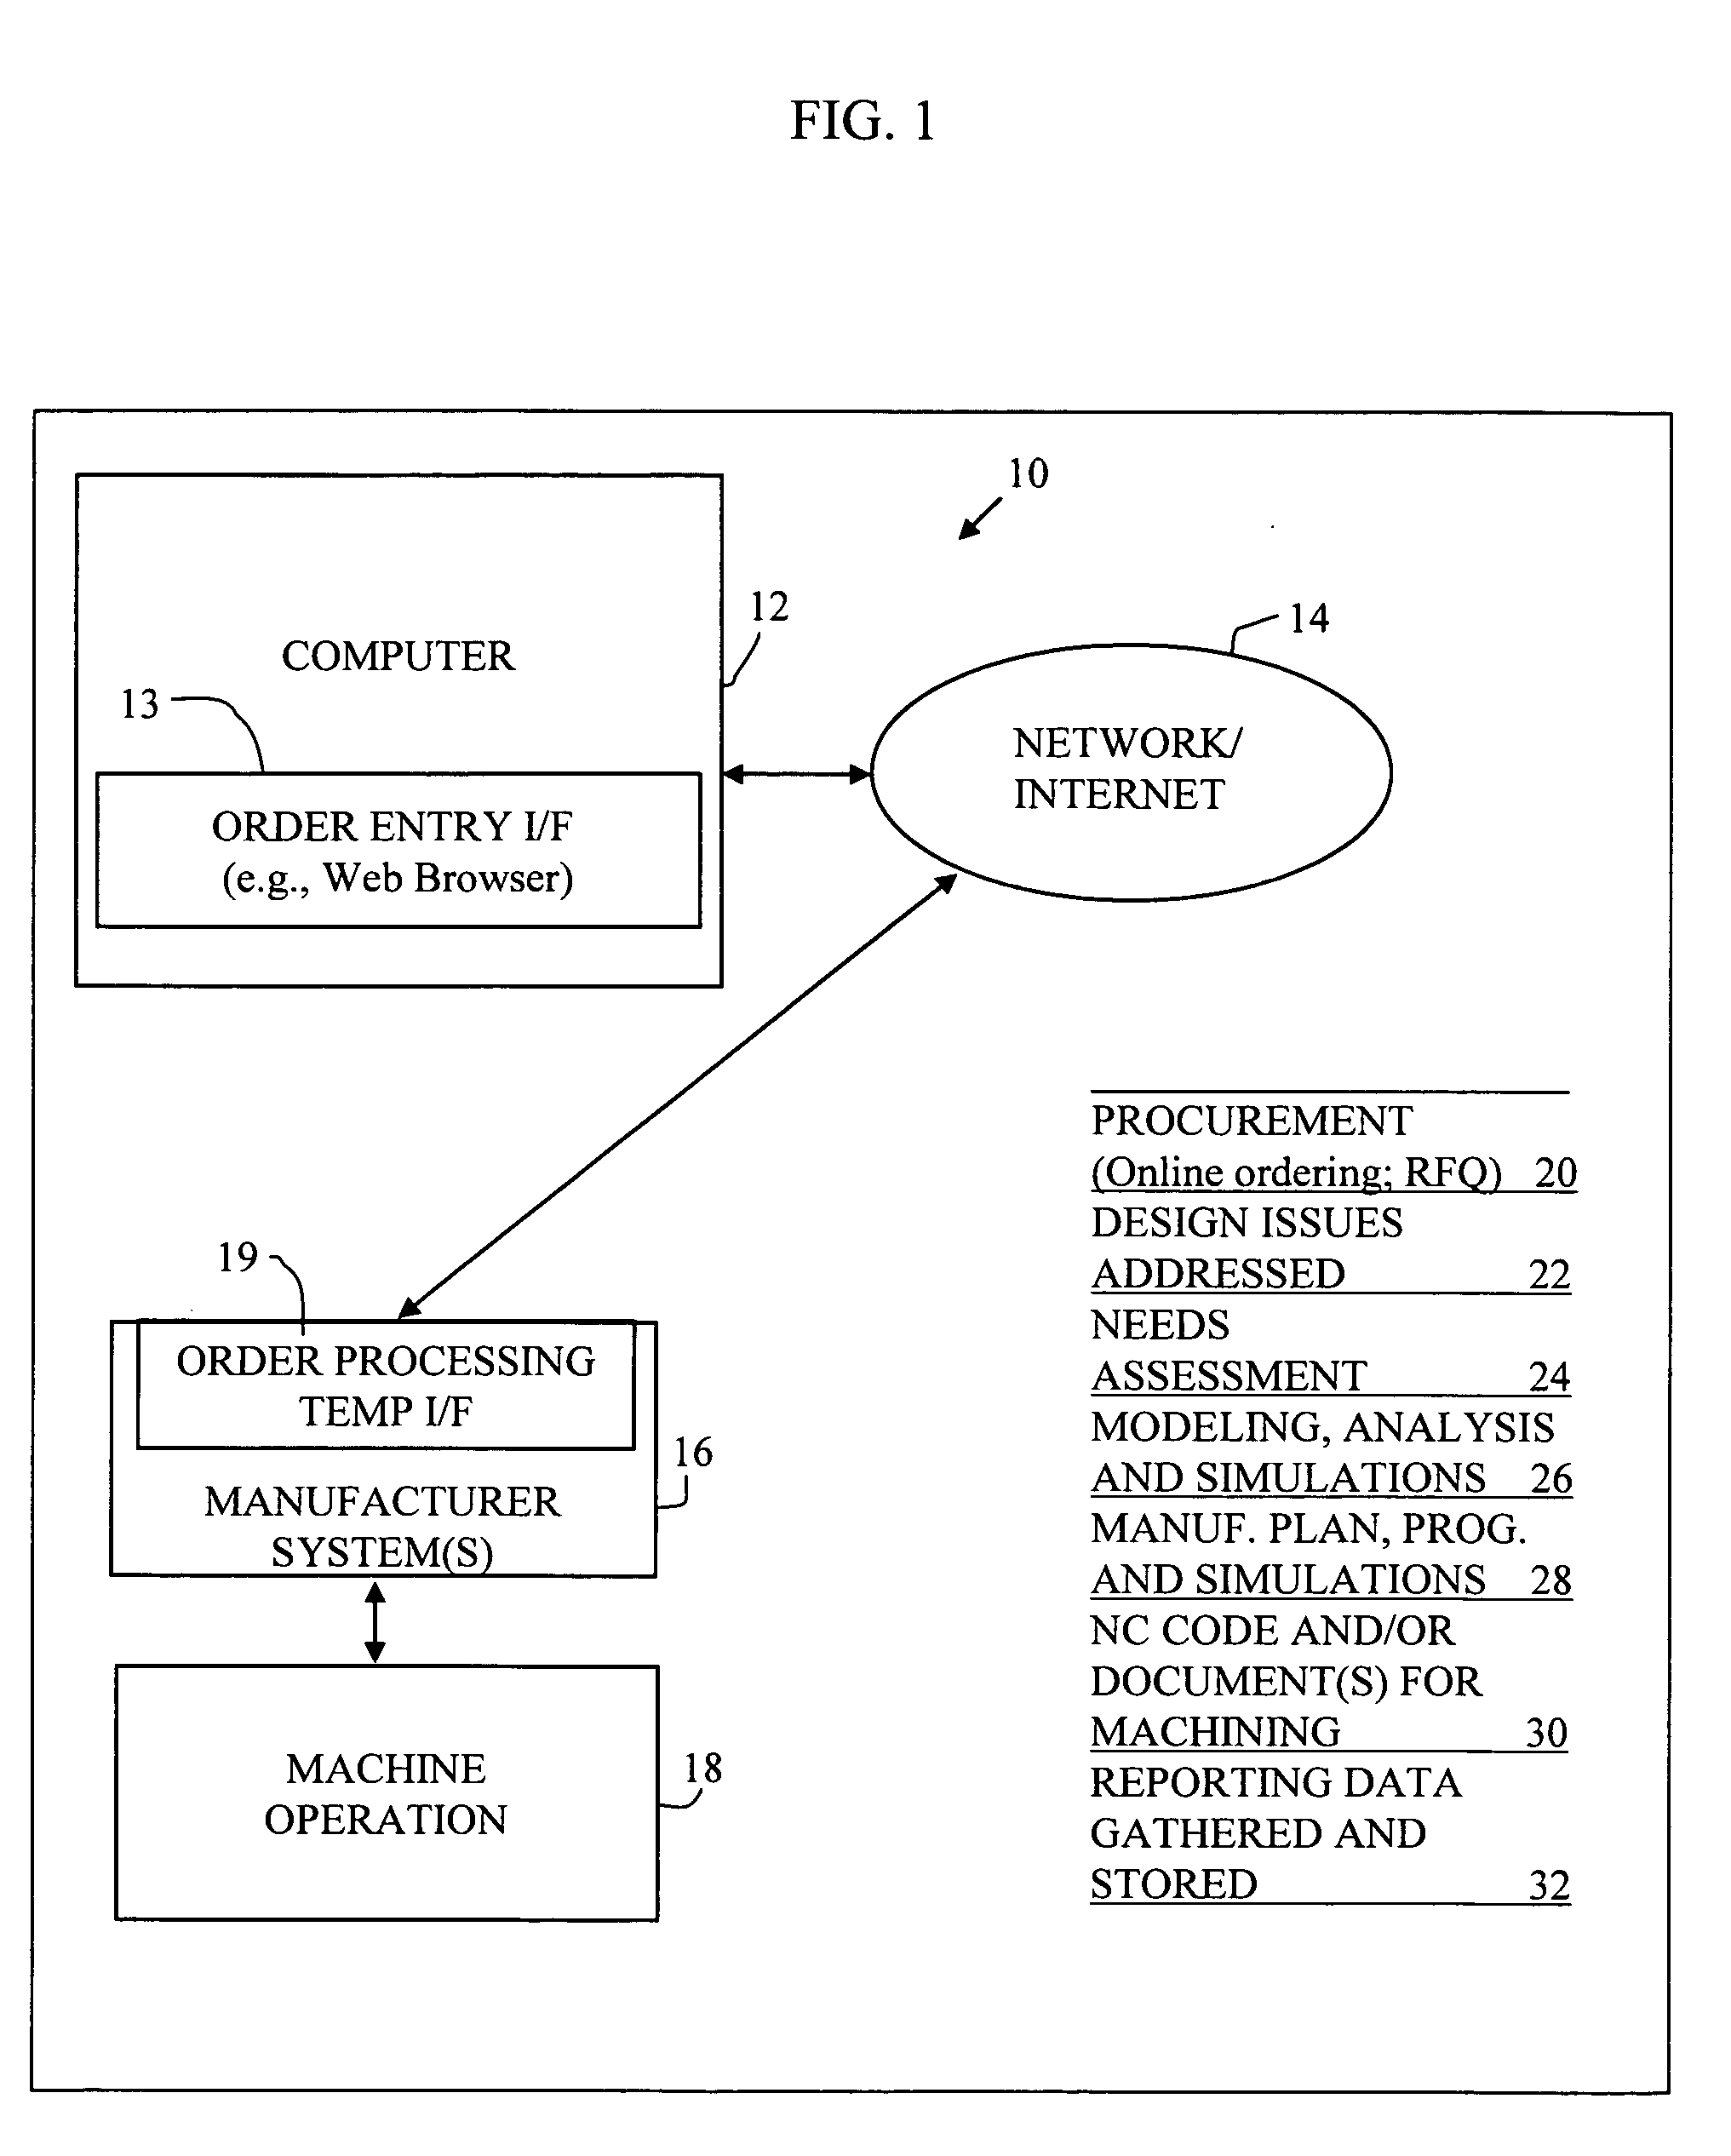 Data entry and system for automated order, design, and manufacture of ordered parts